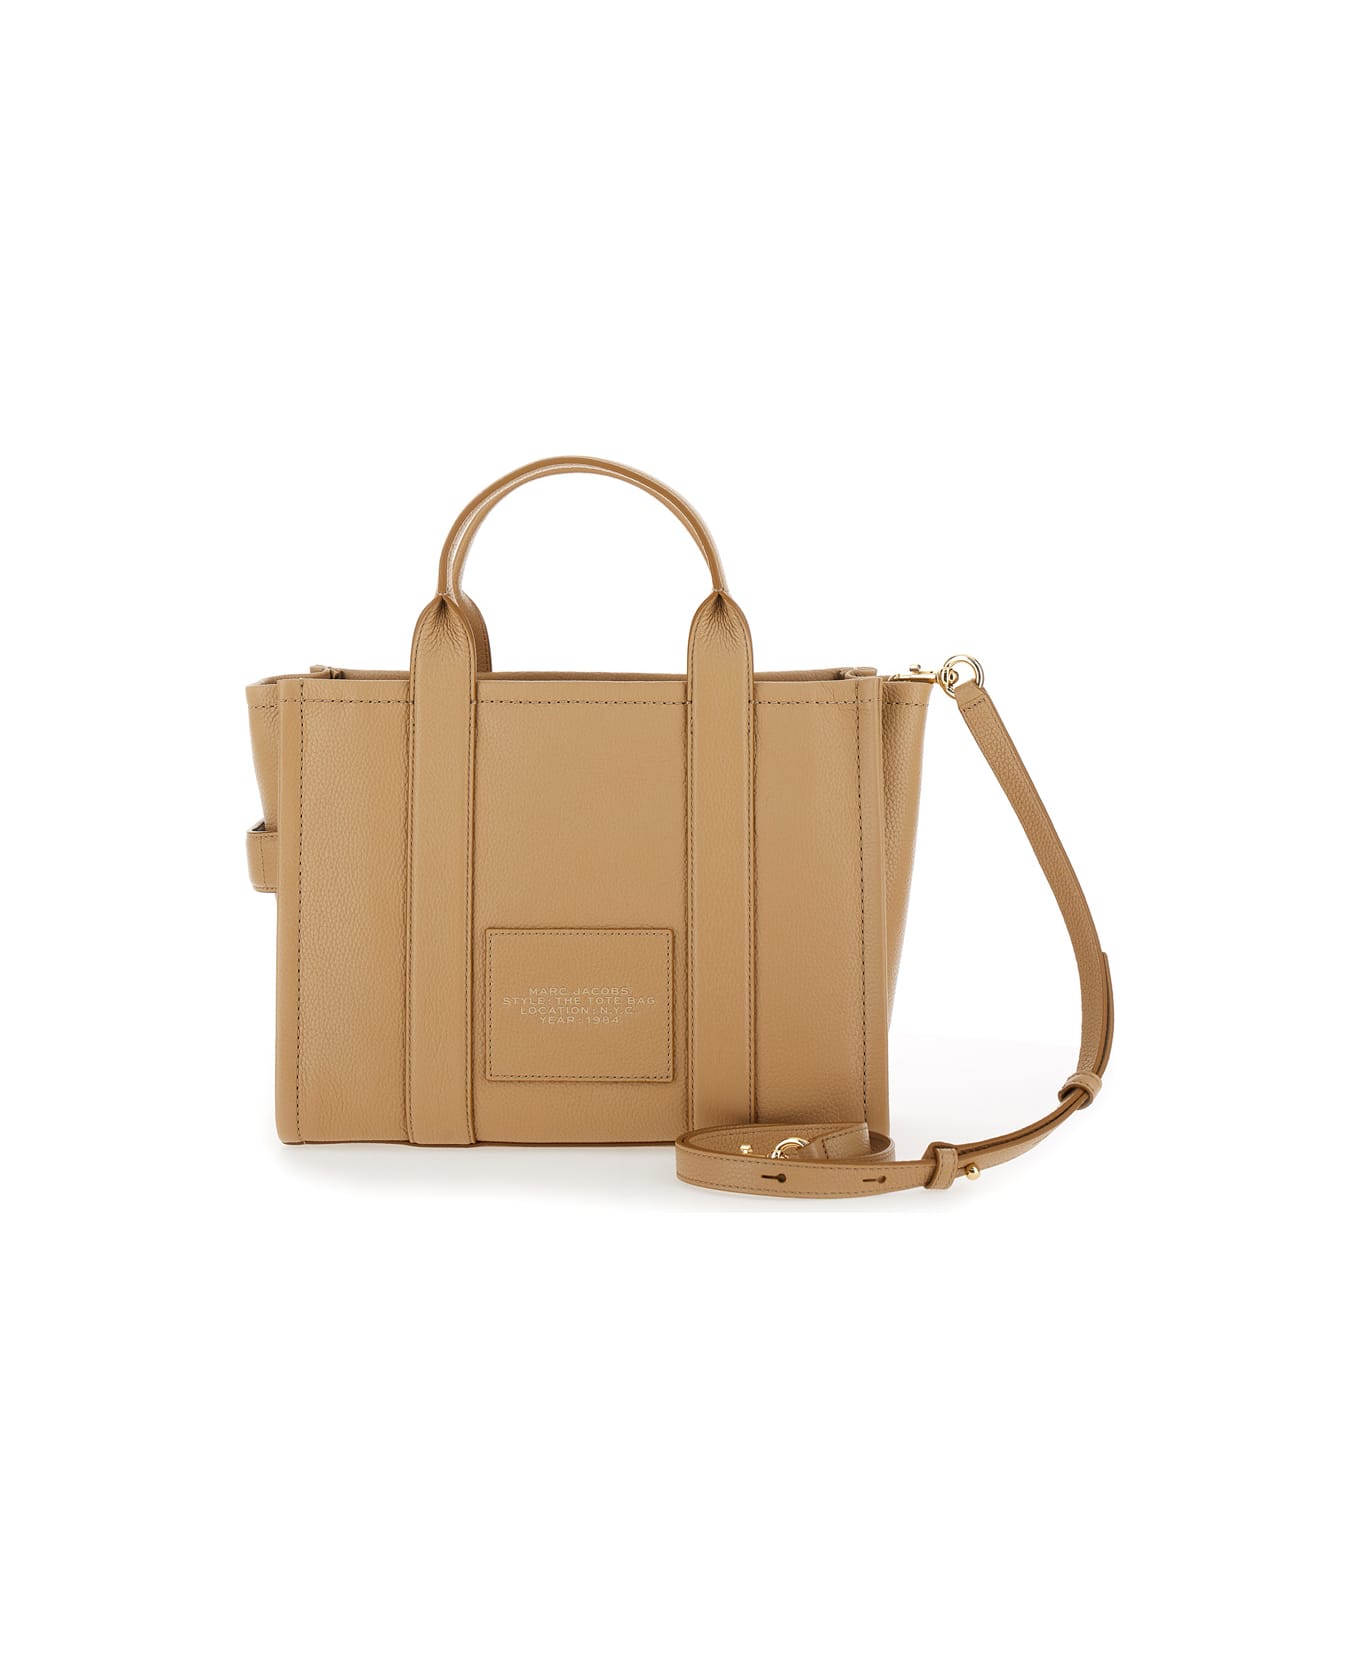 Marc Jacobs 'the Medium Tote Bag' Beige Shoulder Bag With Logo In Grainy Leather Woman - Beige